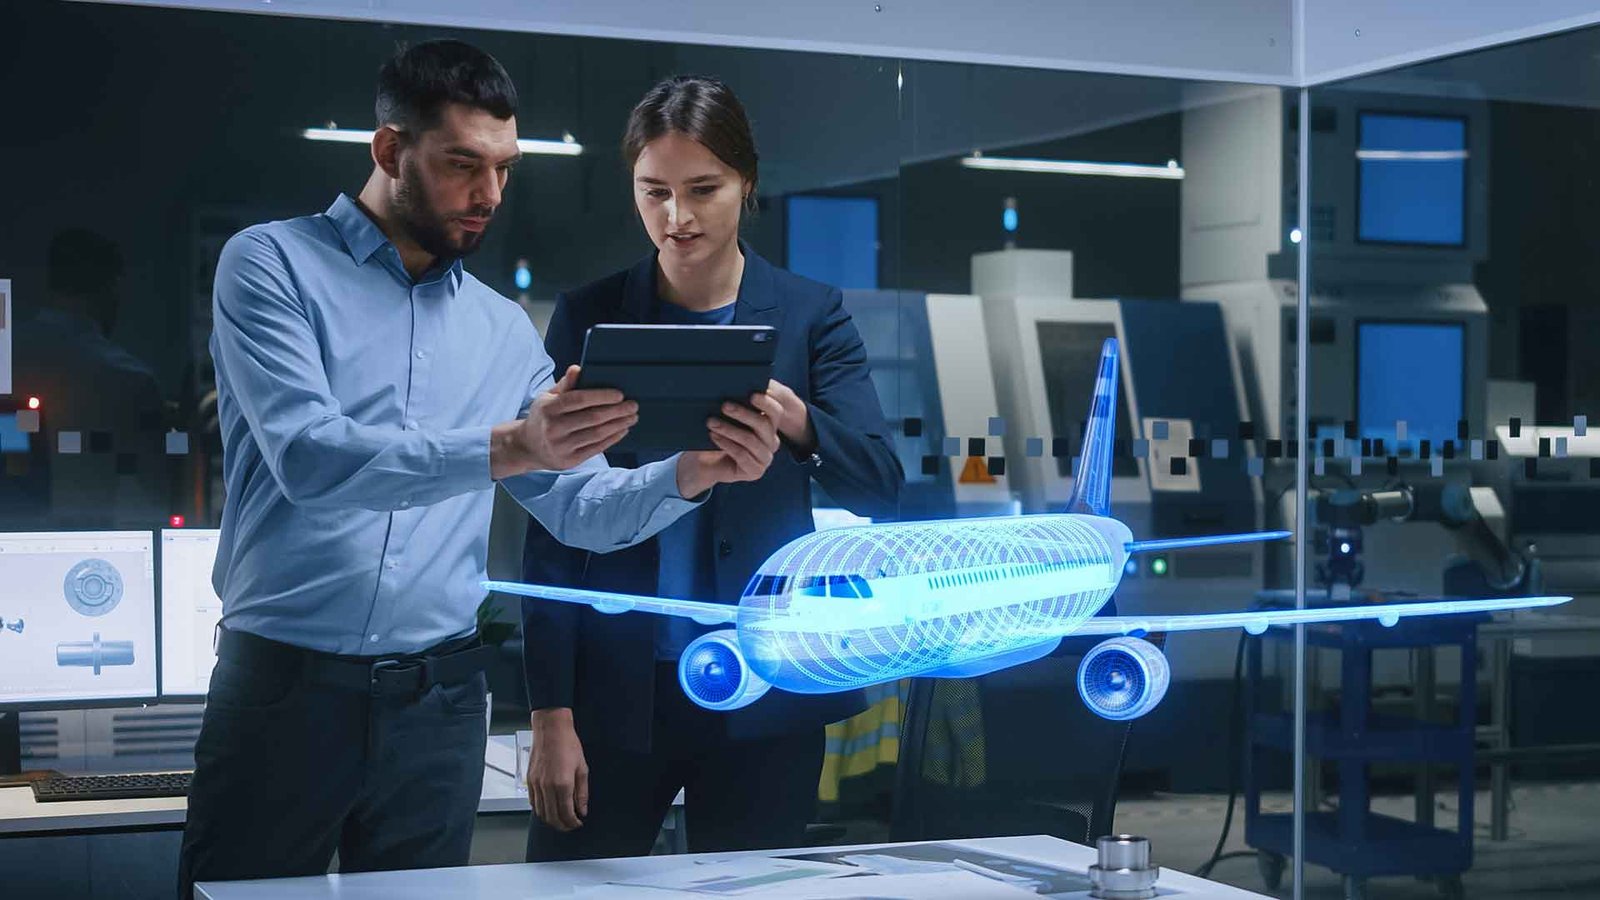 An engineer using a tablet to visualize an aeroplane design in augmented reality